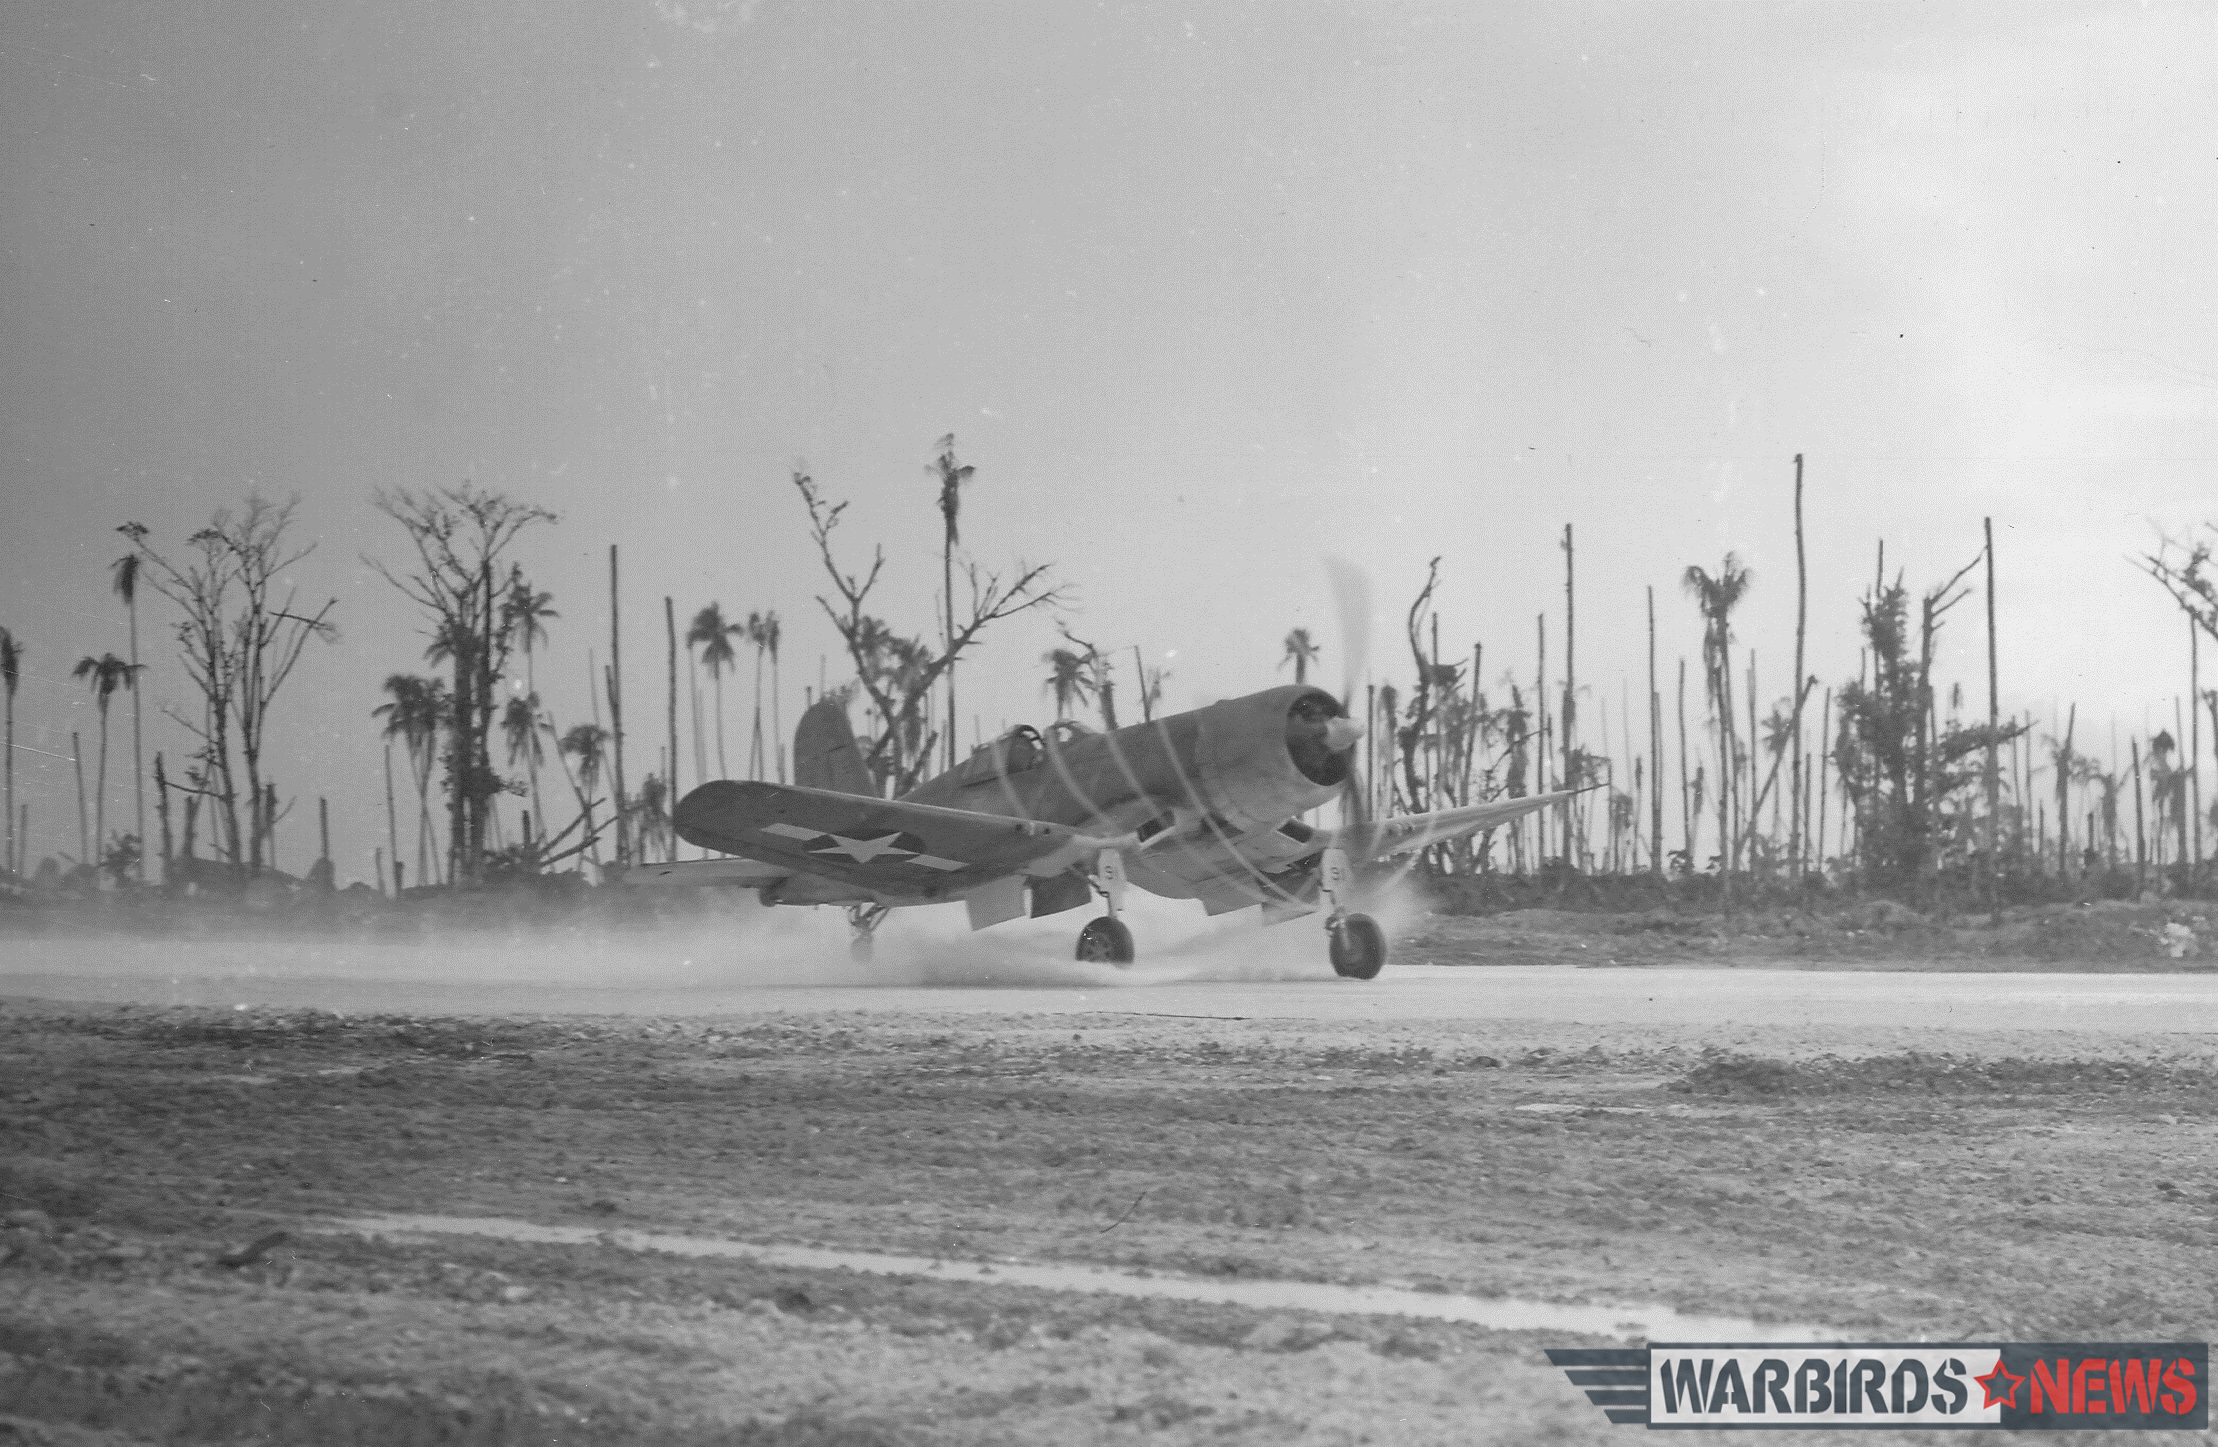 Frequent tropical downpours and crude airstrips—some were bare crushed coral, others had an interlocking mat of pierced steel planking—presented aviators in the Solomons with plenty of challenges. The F4U’s sturdy construction and wide stance gave it stability, but that long nose blocked forward visibility, making takeoffs or landings especially hazardous in poor weather. Here, the propeller of an F4U-1 of VMF-215 leaves a vapor trail as it accelerates down the strip at Munda Point, New Georgia. Photo credit: Bruce Gamble collection via National Archives